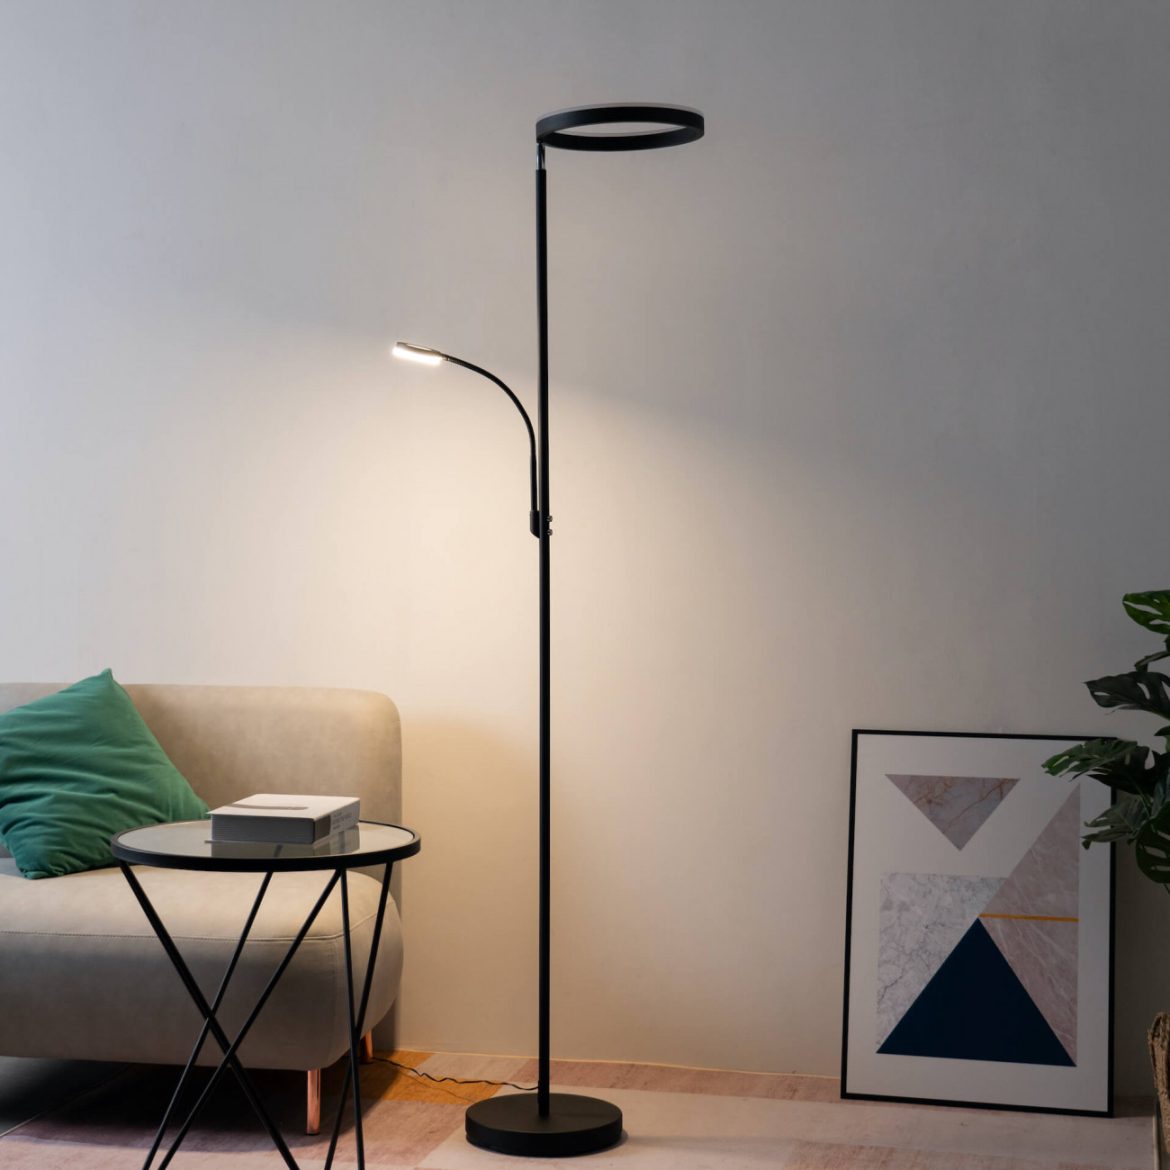 Luminaire Store: Where Lighting Meets Style and Functionality